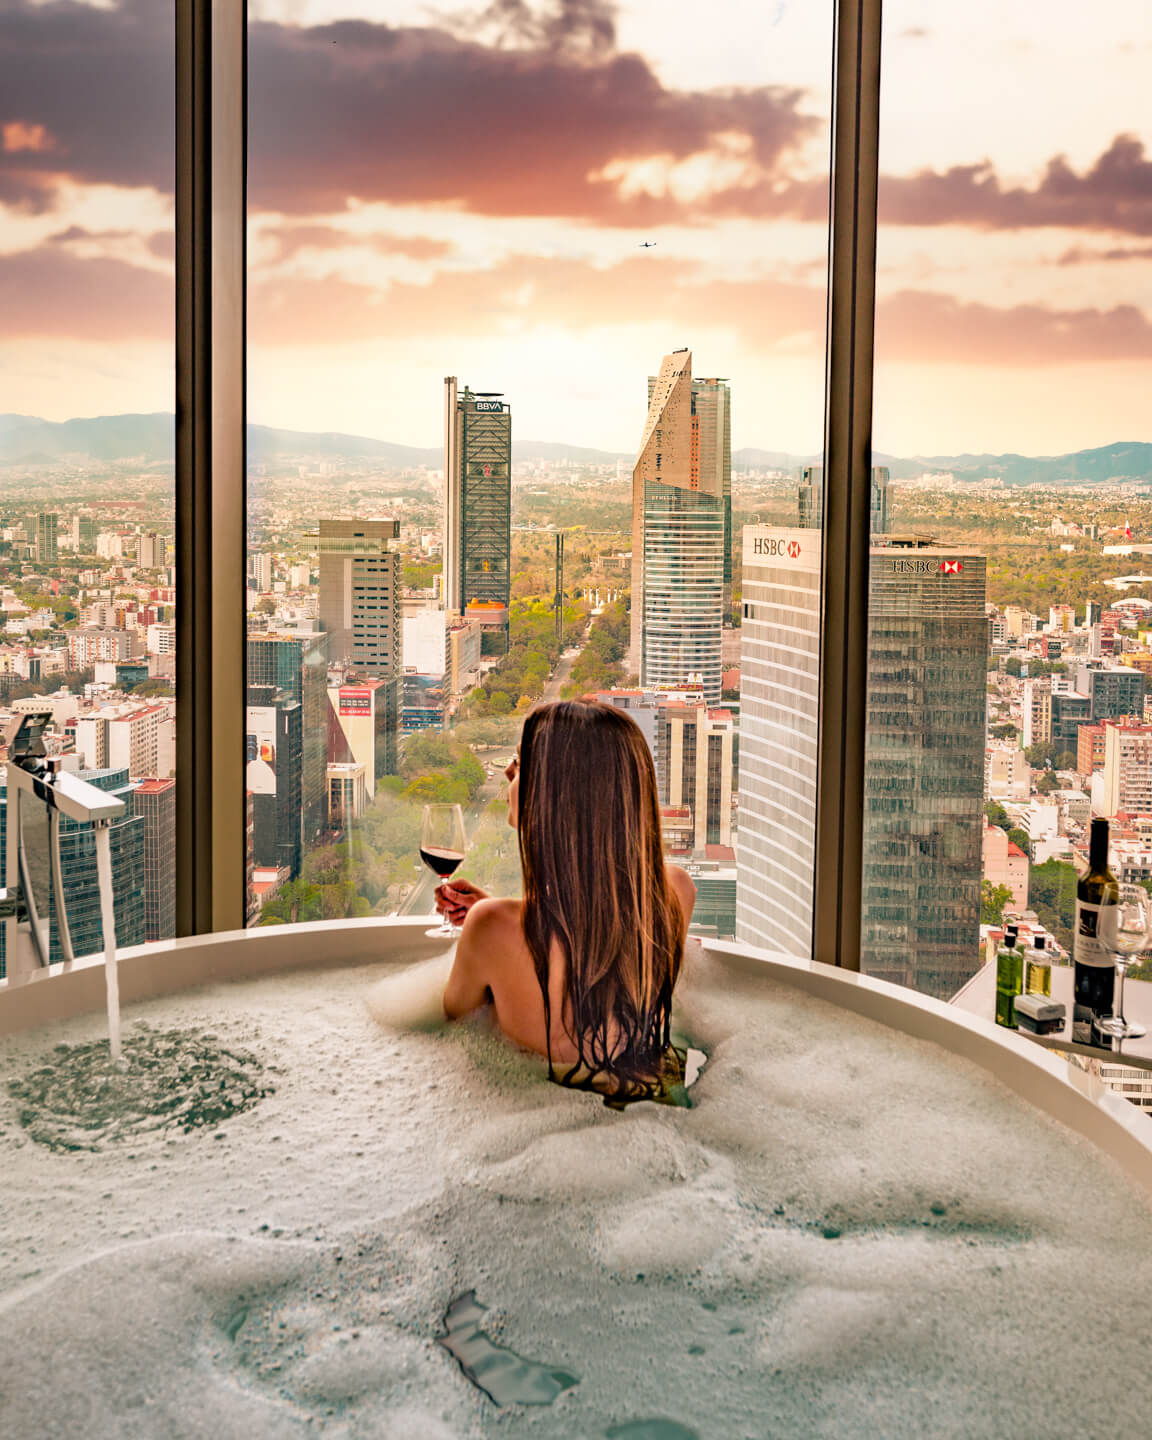 girl sitting in a bathtub and overlooking Mexico City